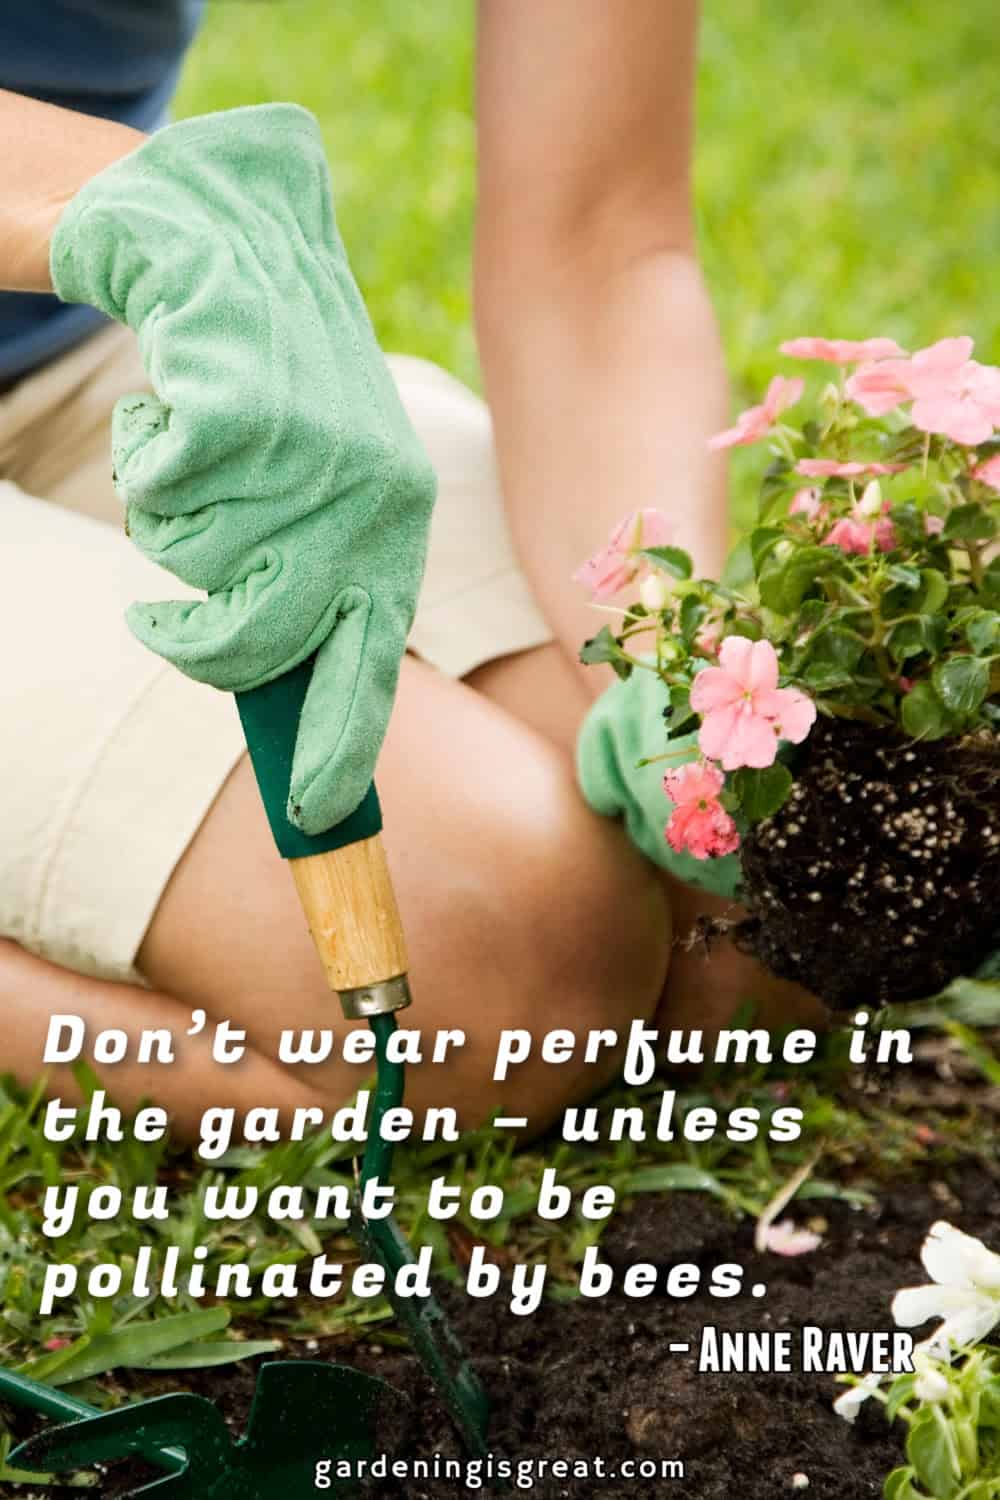 “Don’t wear perfume in the garden – unless you want to be pollinated by bees.” – Anne Raver